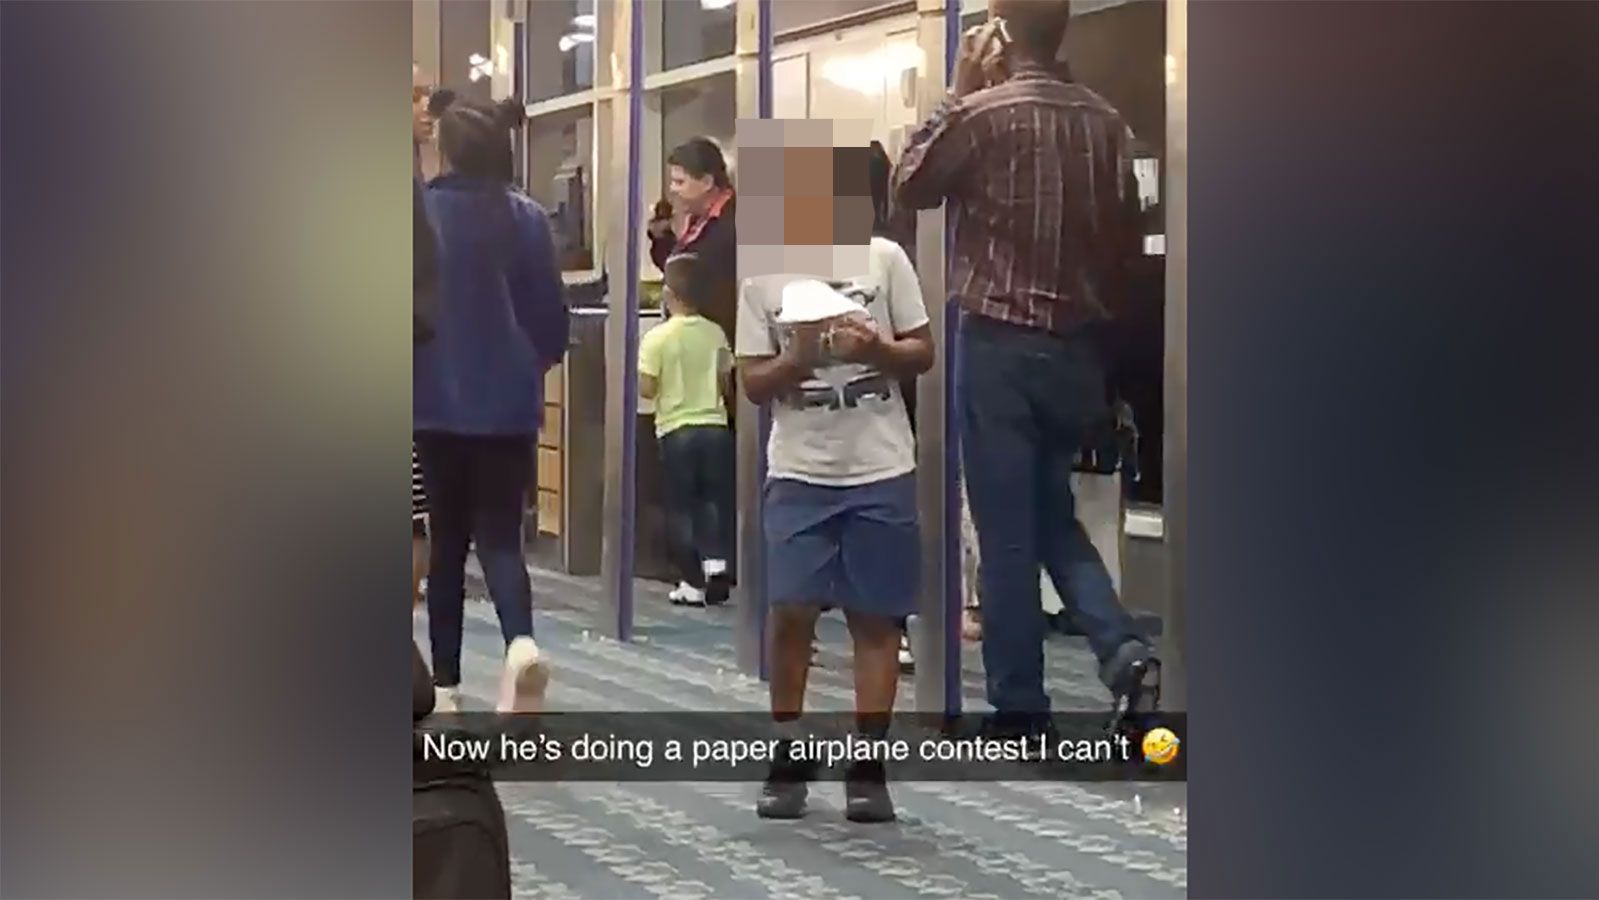 Kristen Dundas posted about a flight delay that became enjoyable when Southwest staff started playing contests and games with travelers. CNN blurred the face of this child, who took part in a paper airplane contest at the gate.